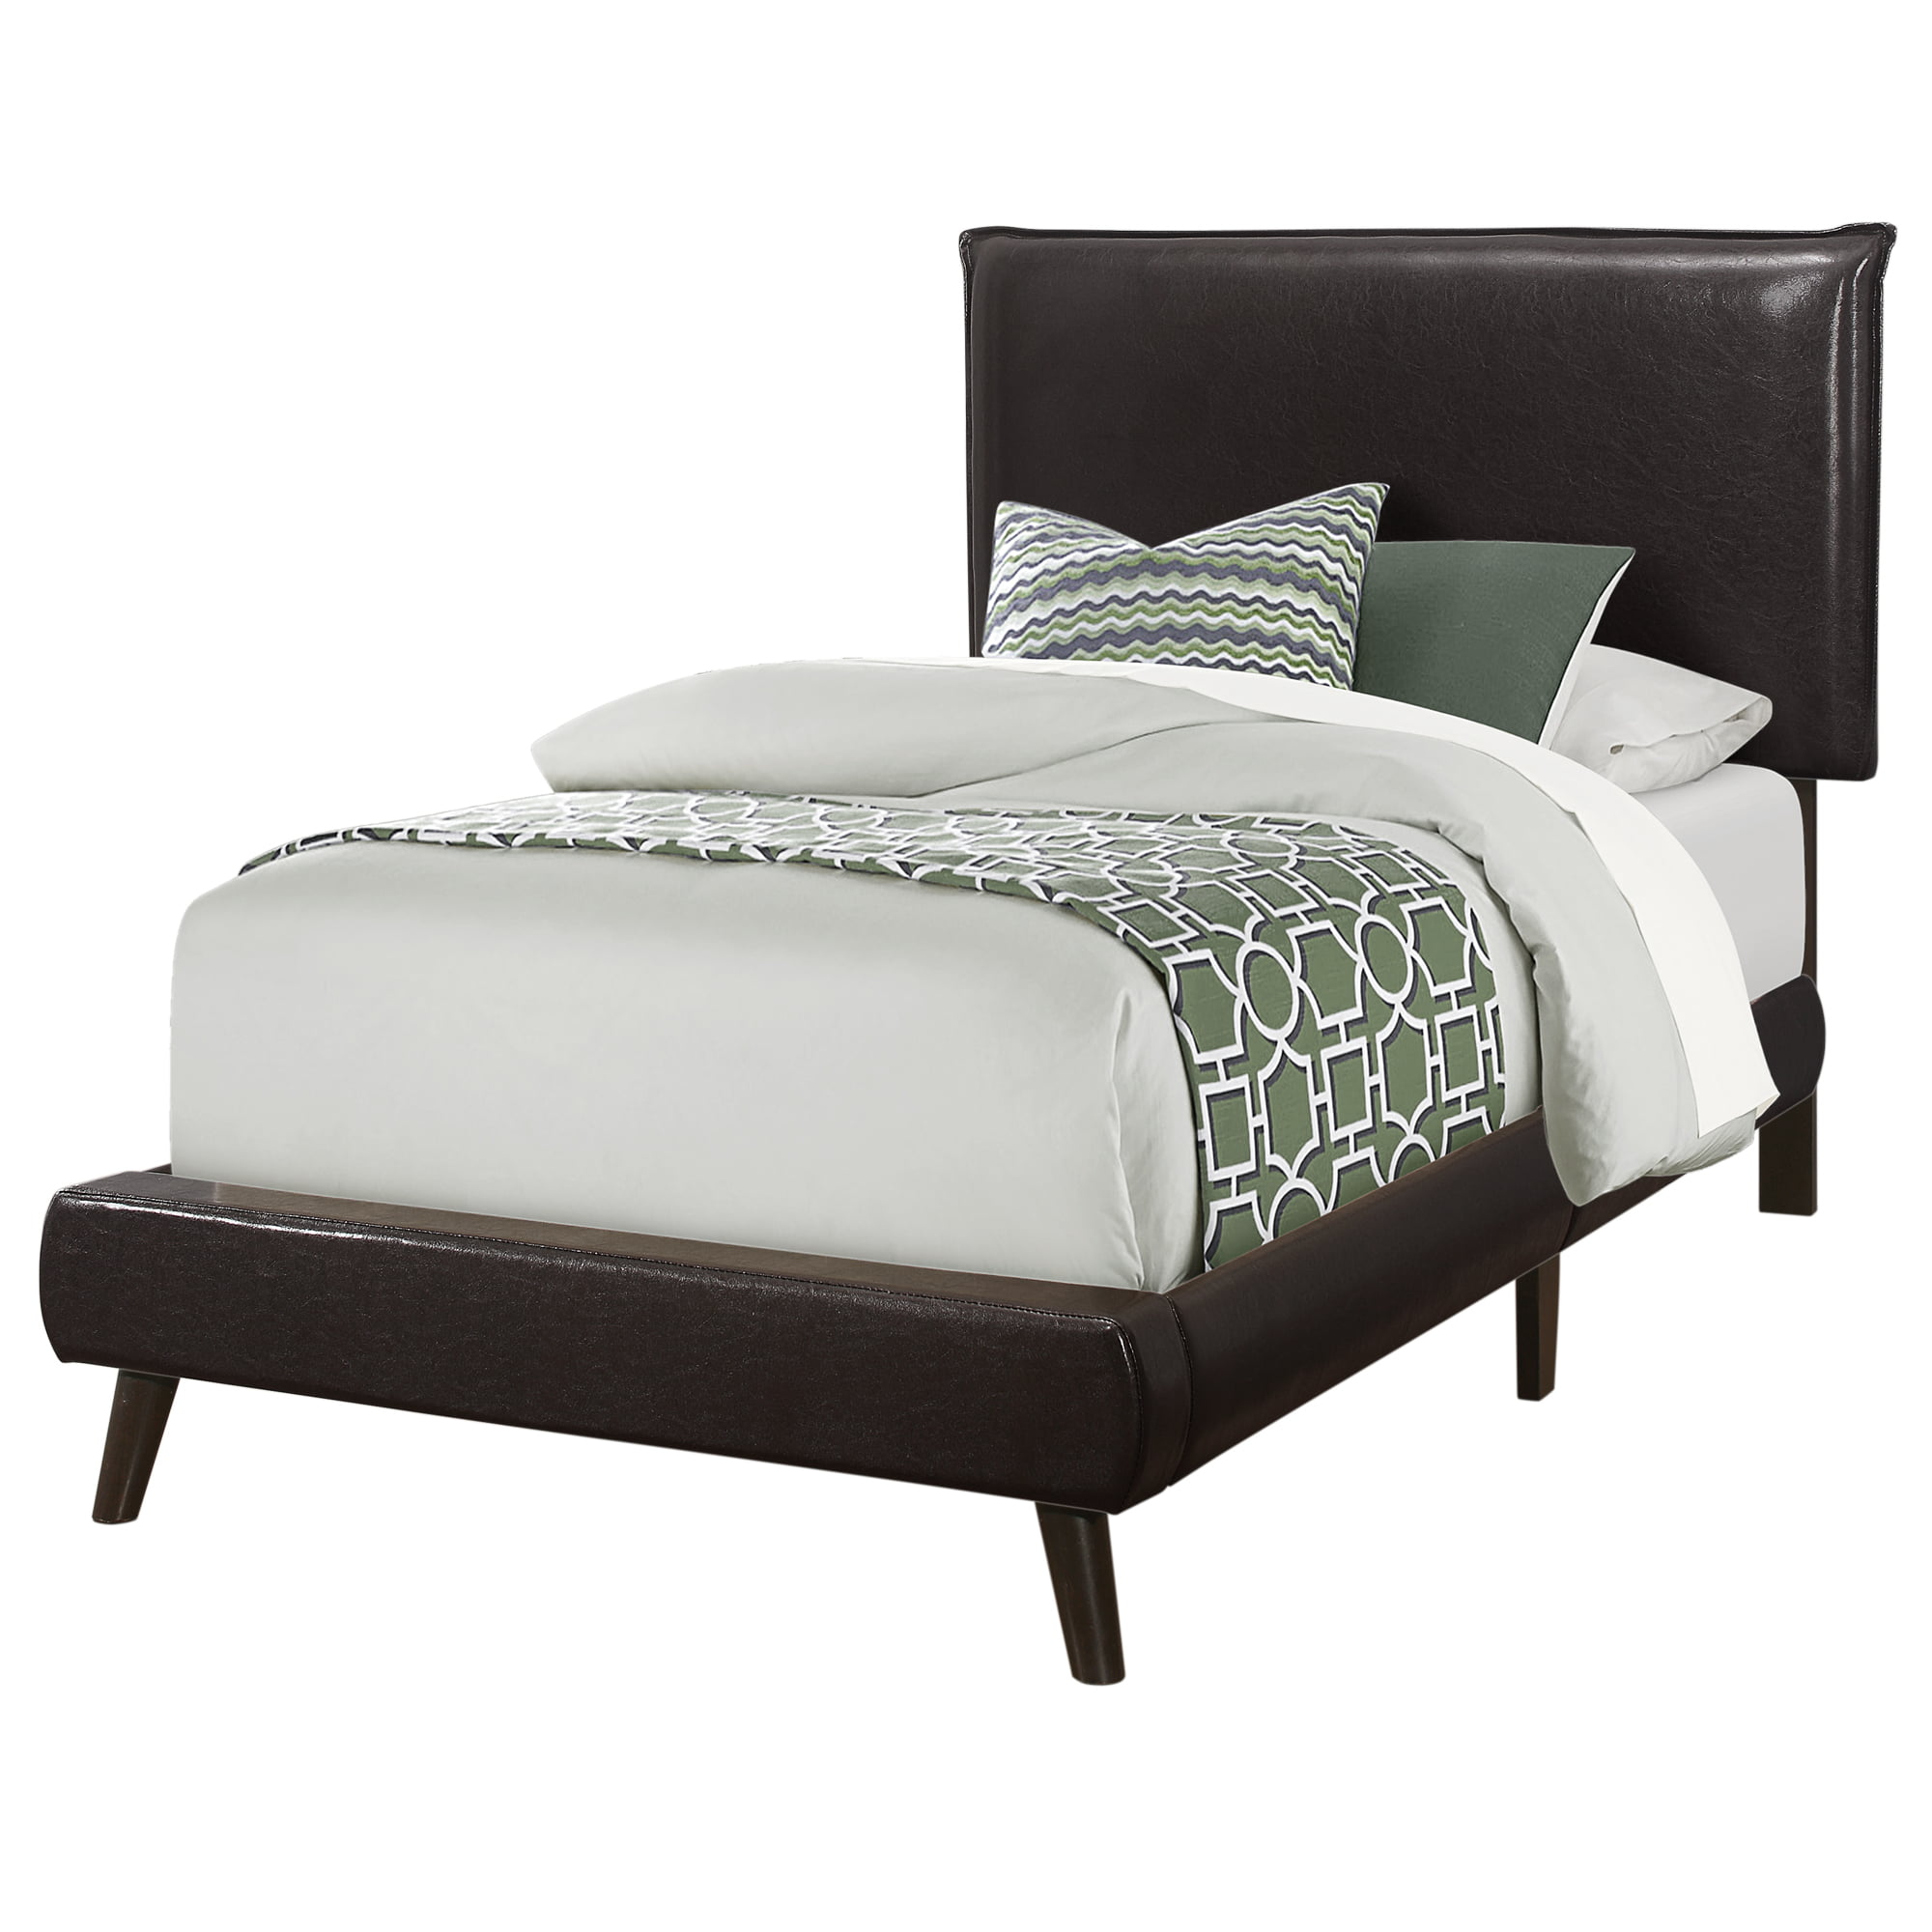 82.75" Matte Brown Contemporary Rectangular Bed Frame - Twin Size